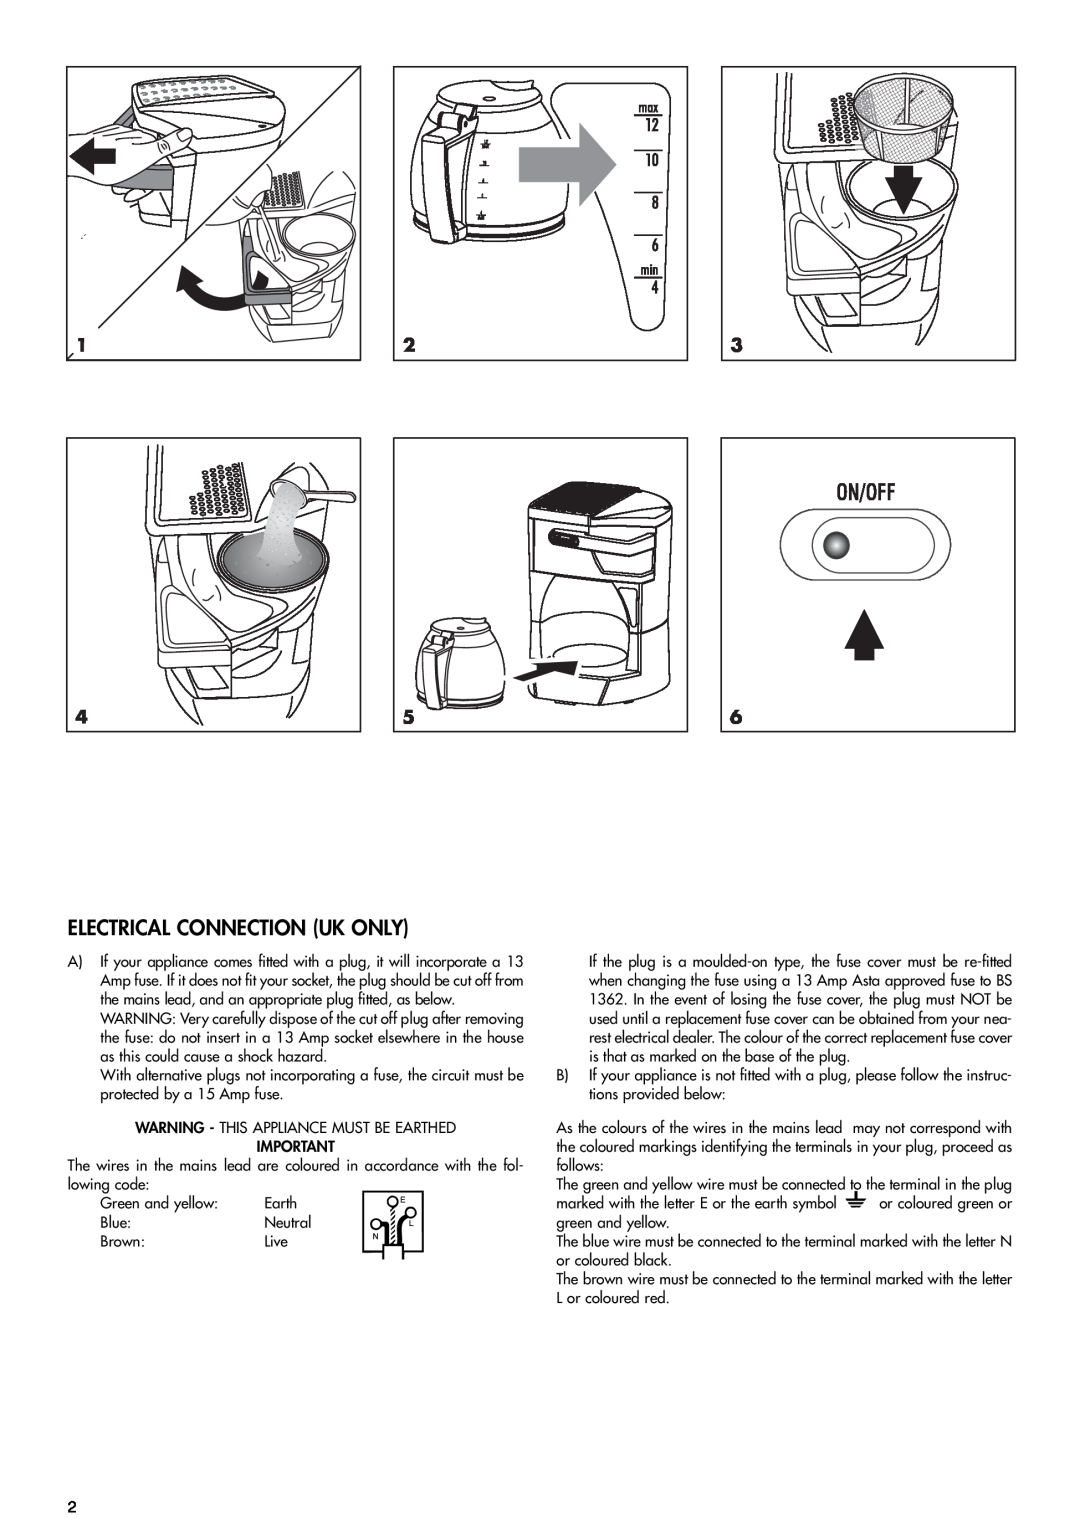 DeLonghi 1321013IDL manual Electrical Connection Uk Only 